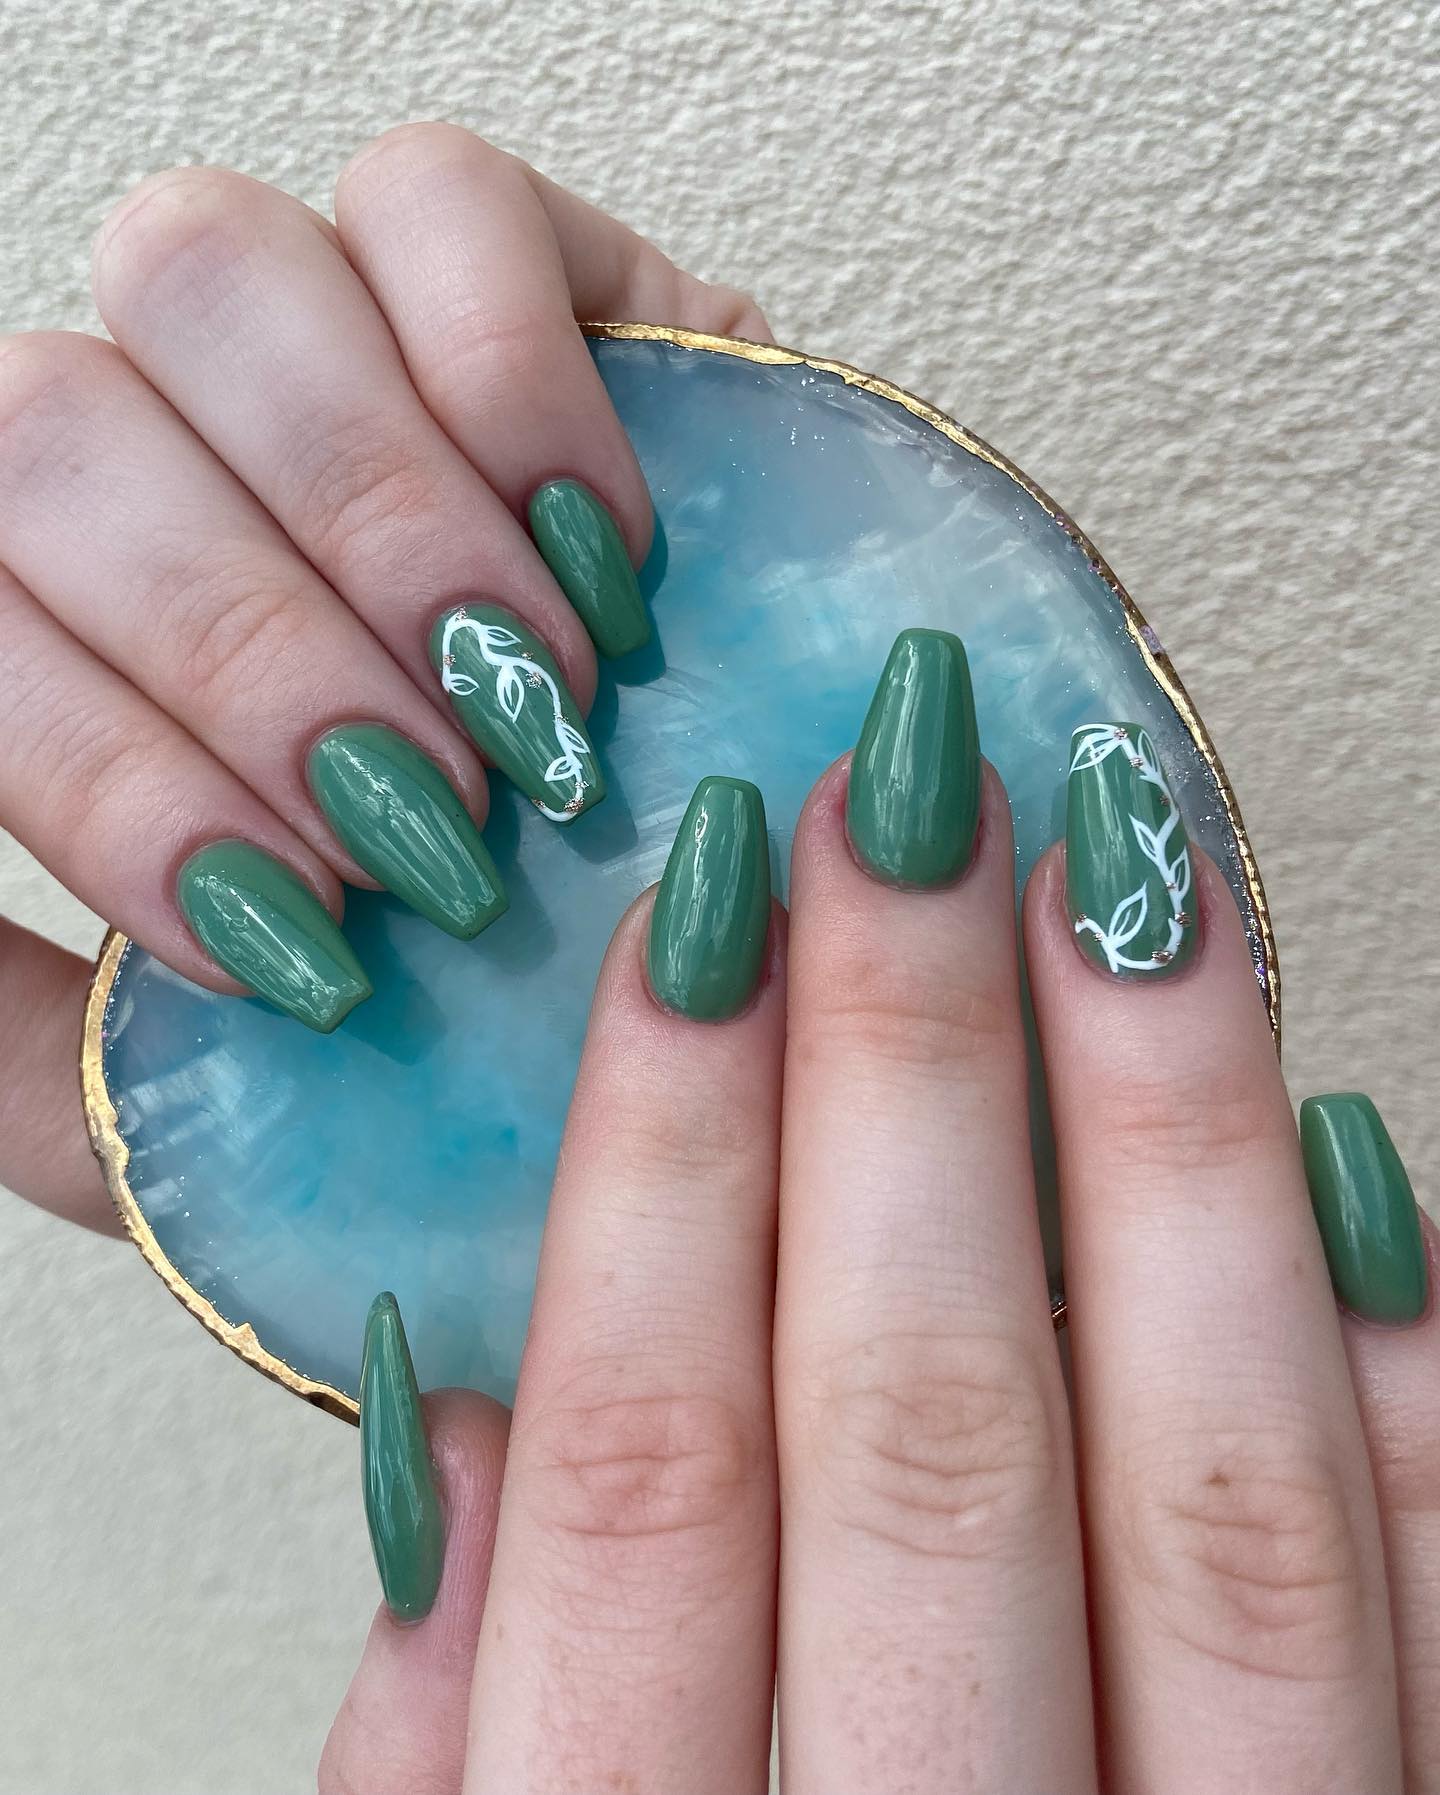 Dark green tones are the perfect choice for winter. This shade of green looks a little bit pastel, too. You should definitely try this in cold winter days.